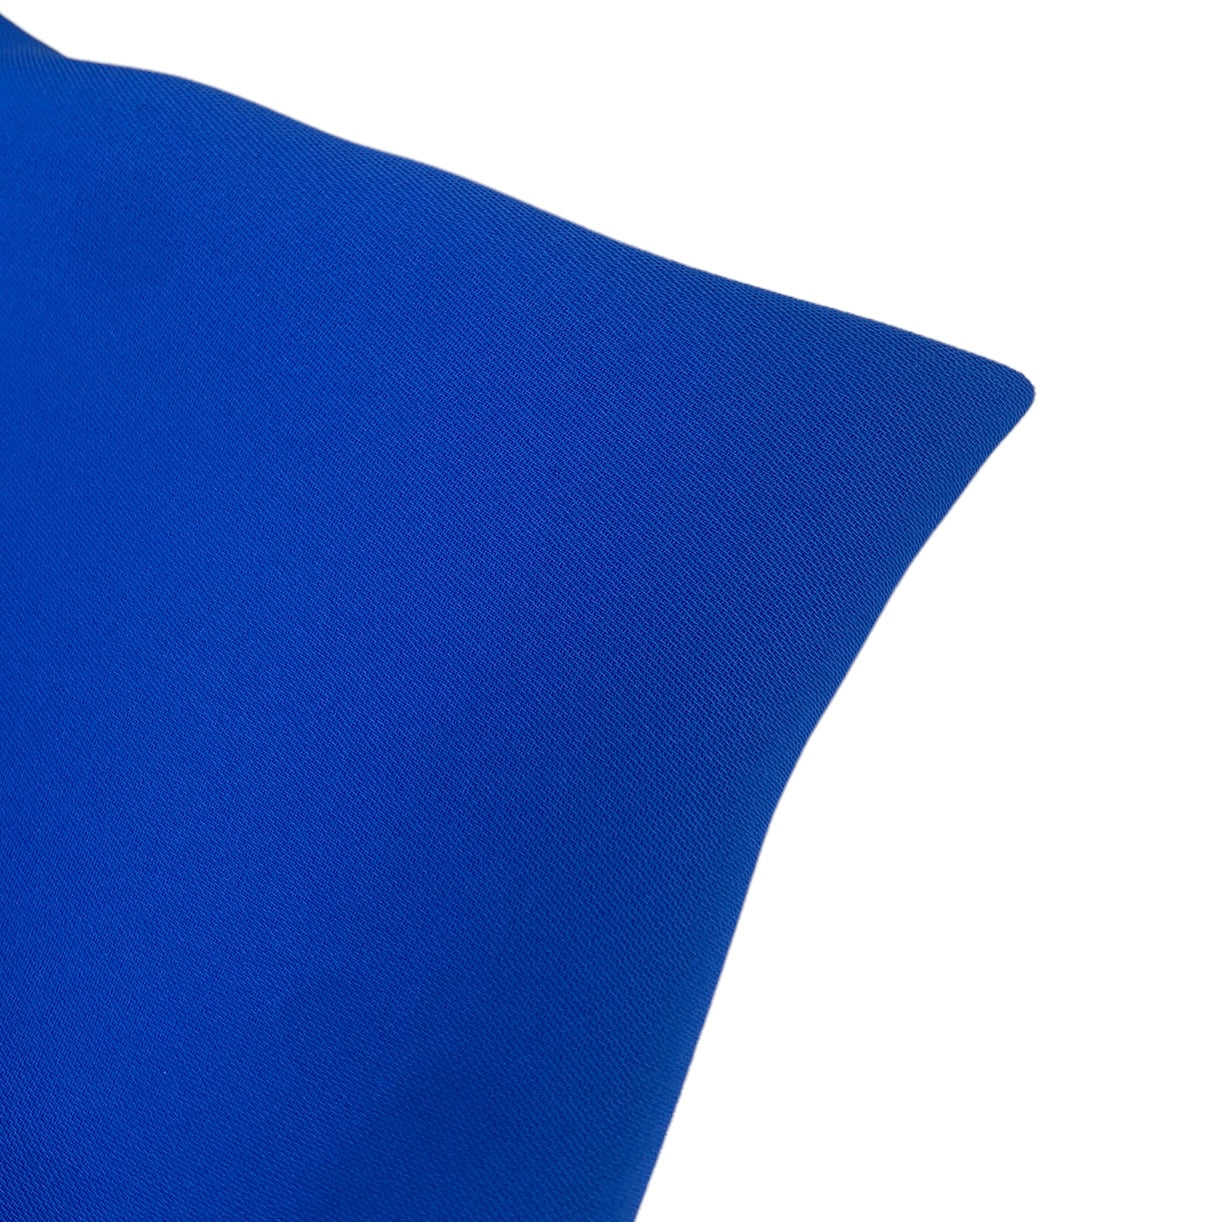 Polyester Georgette - 58” - Electric Blue